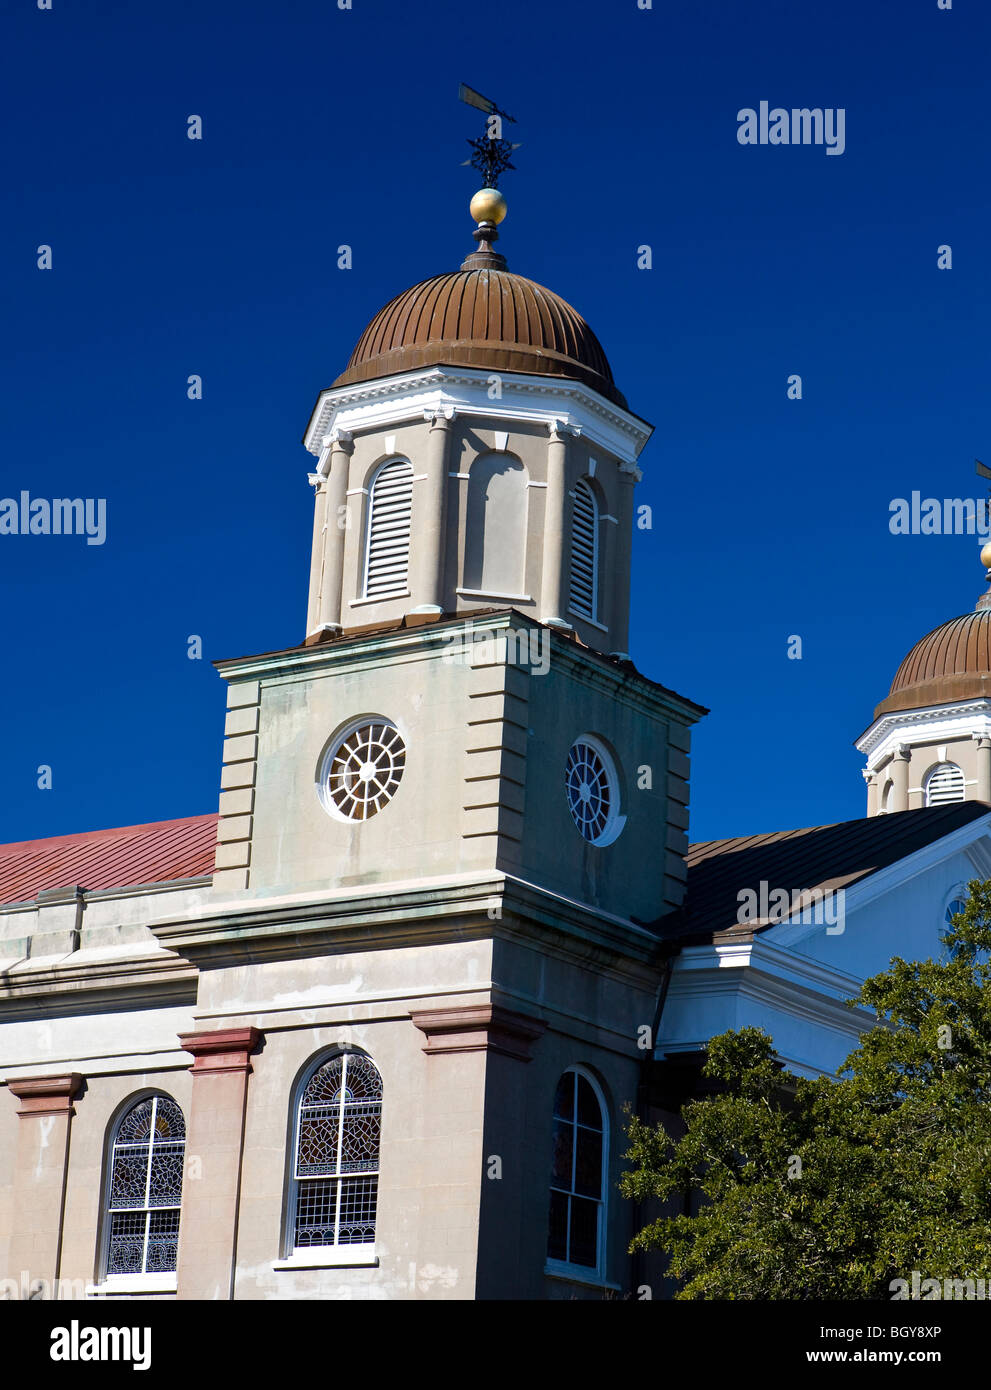 Dome on top of a church, Meeting Street, Charleston, South Carolina, United States of America. Stock Photo